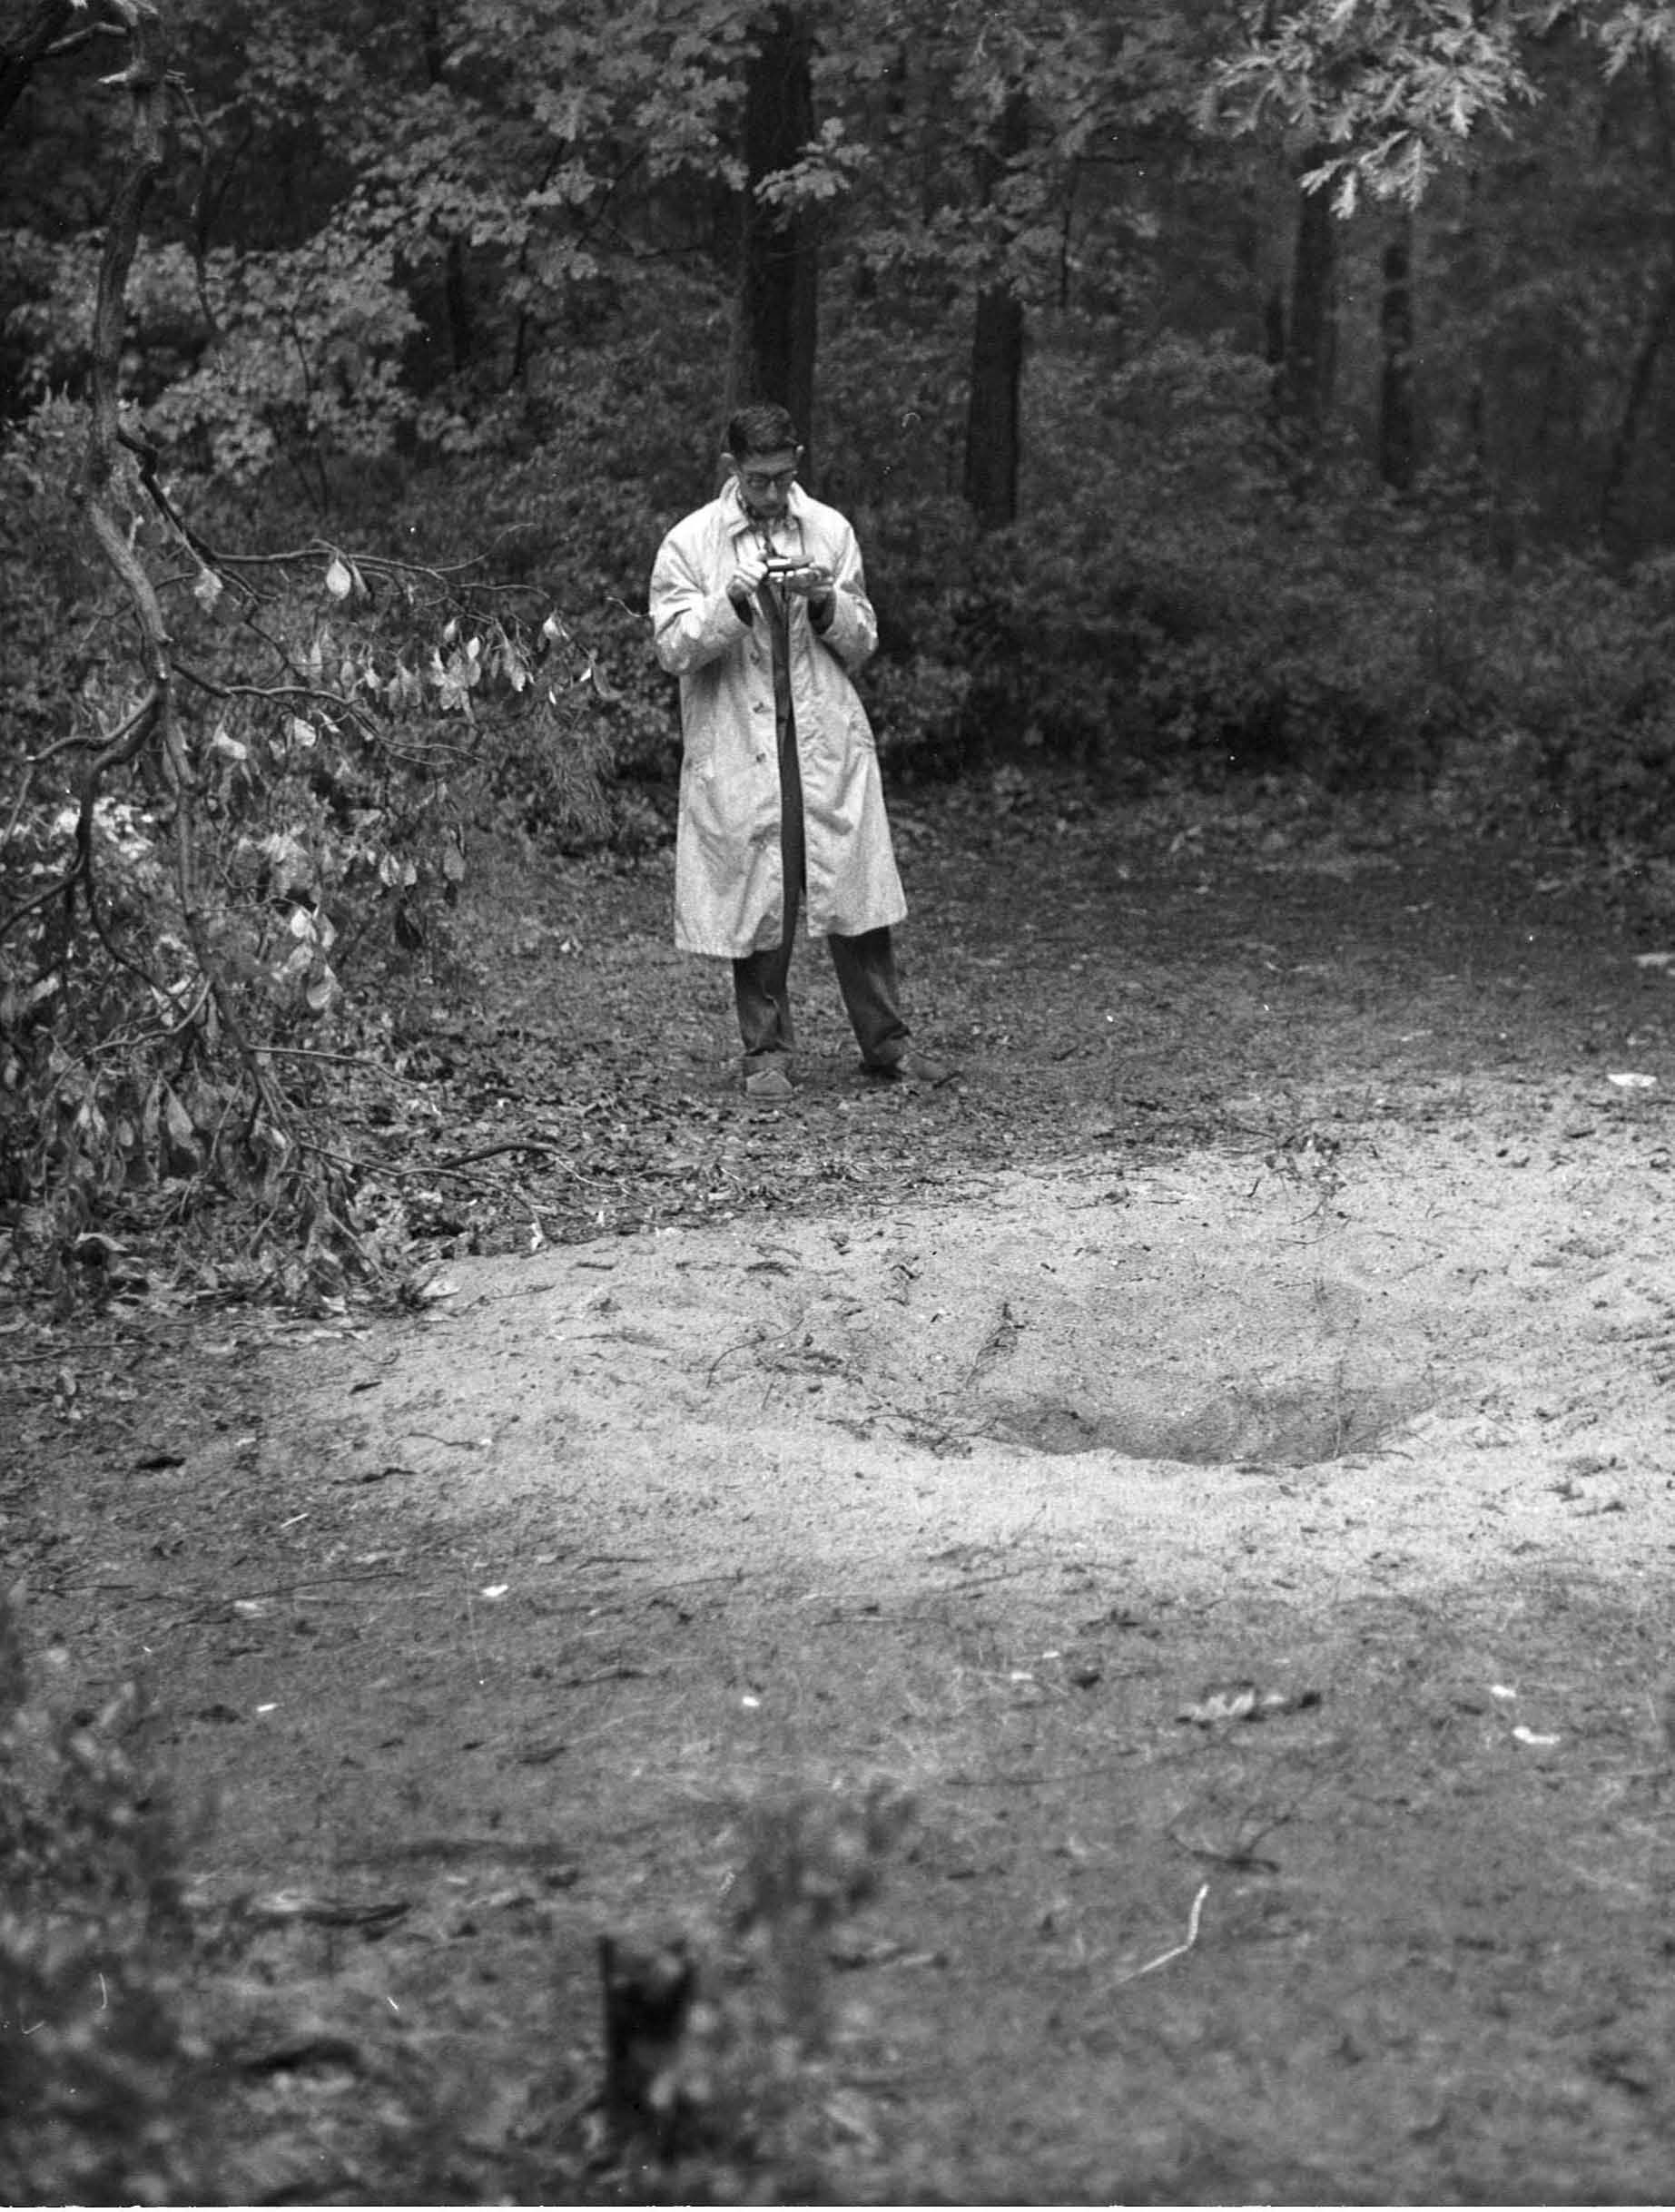 A 16-year-old UFO investigator inspects the "central crater" at Glassboro, NJ. The broken limb of the sassafras tree is on the left. Photo by the Cassel family of Glassboro.